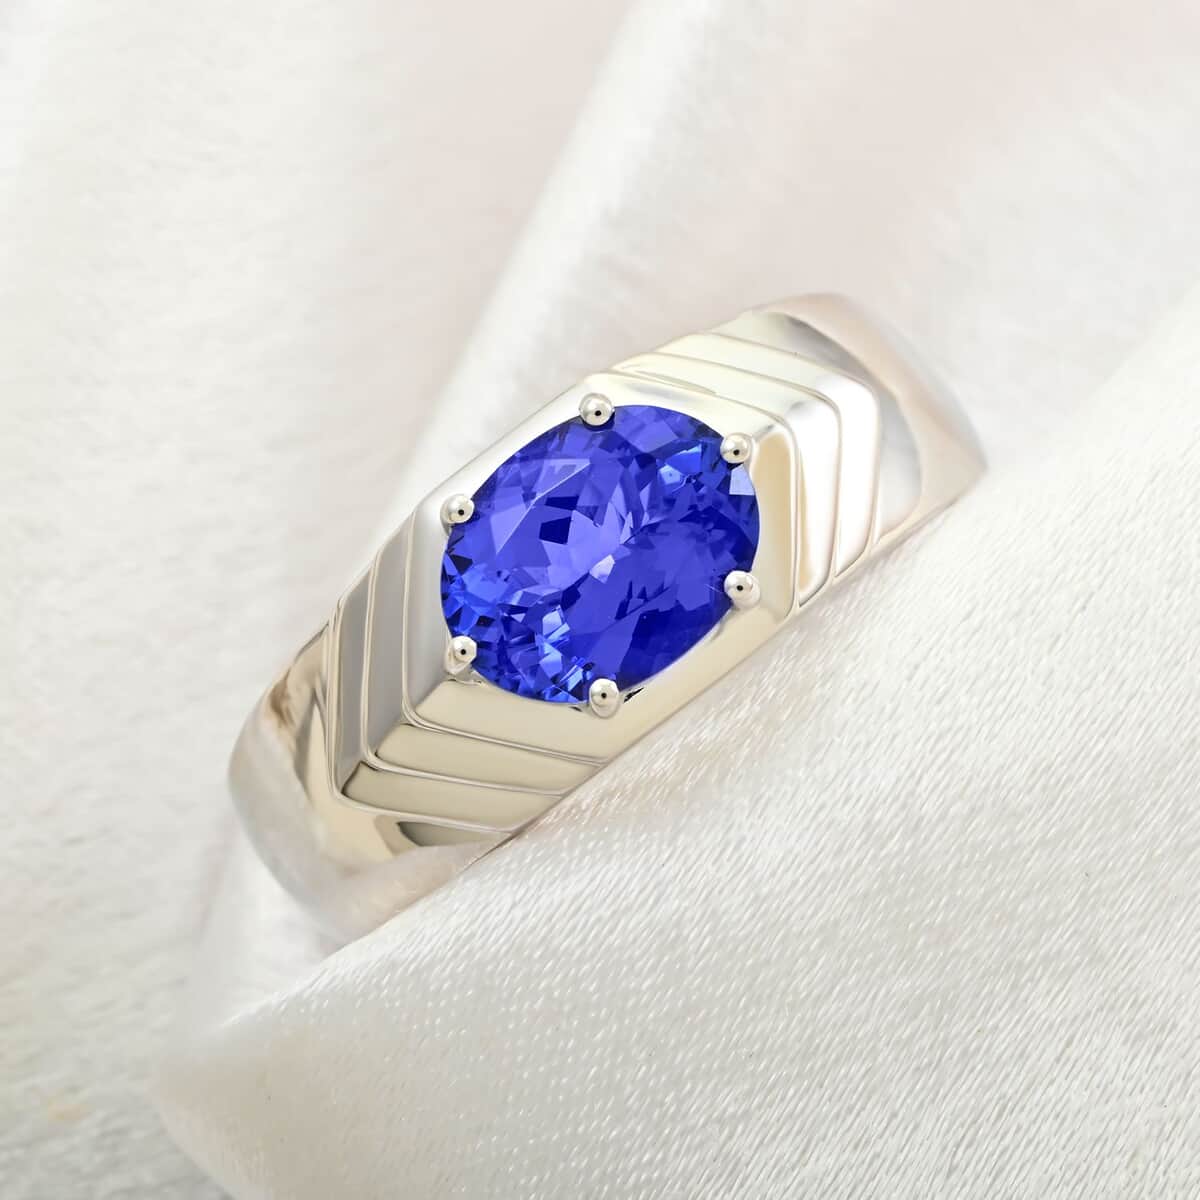 Luxoro 14K White Gold AAA Tanzanite Solitaire Men's Ring (Size 10.0) 7.30 Grams 2.50 ctw image number 1